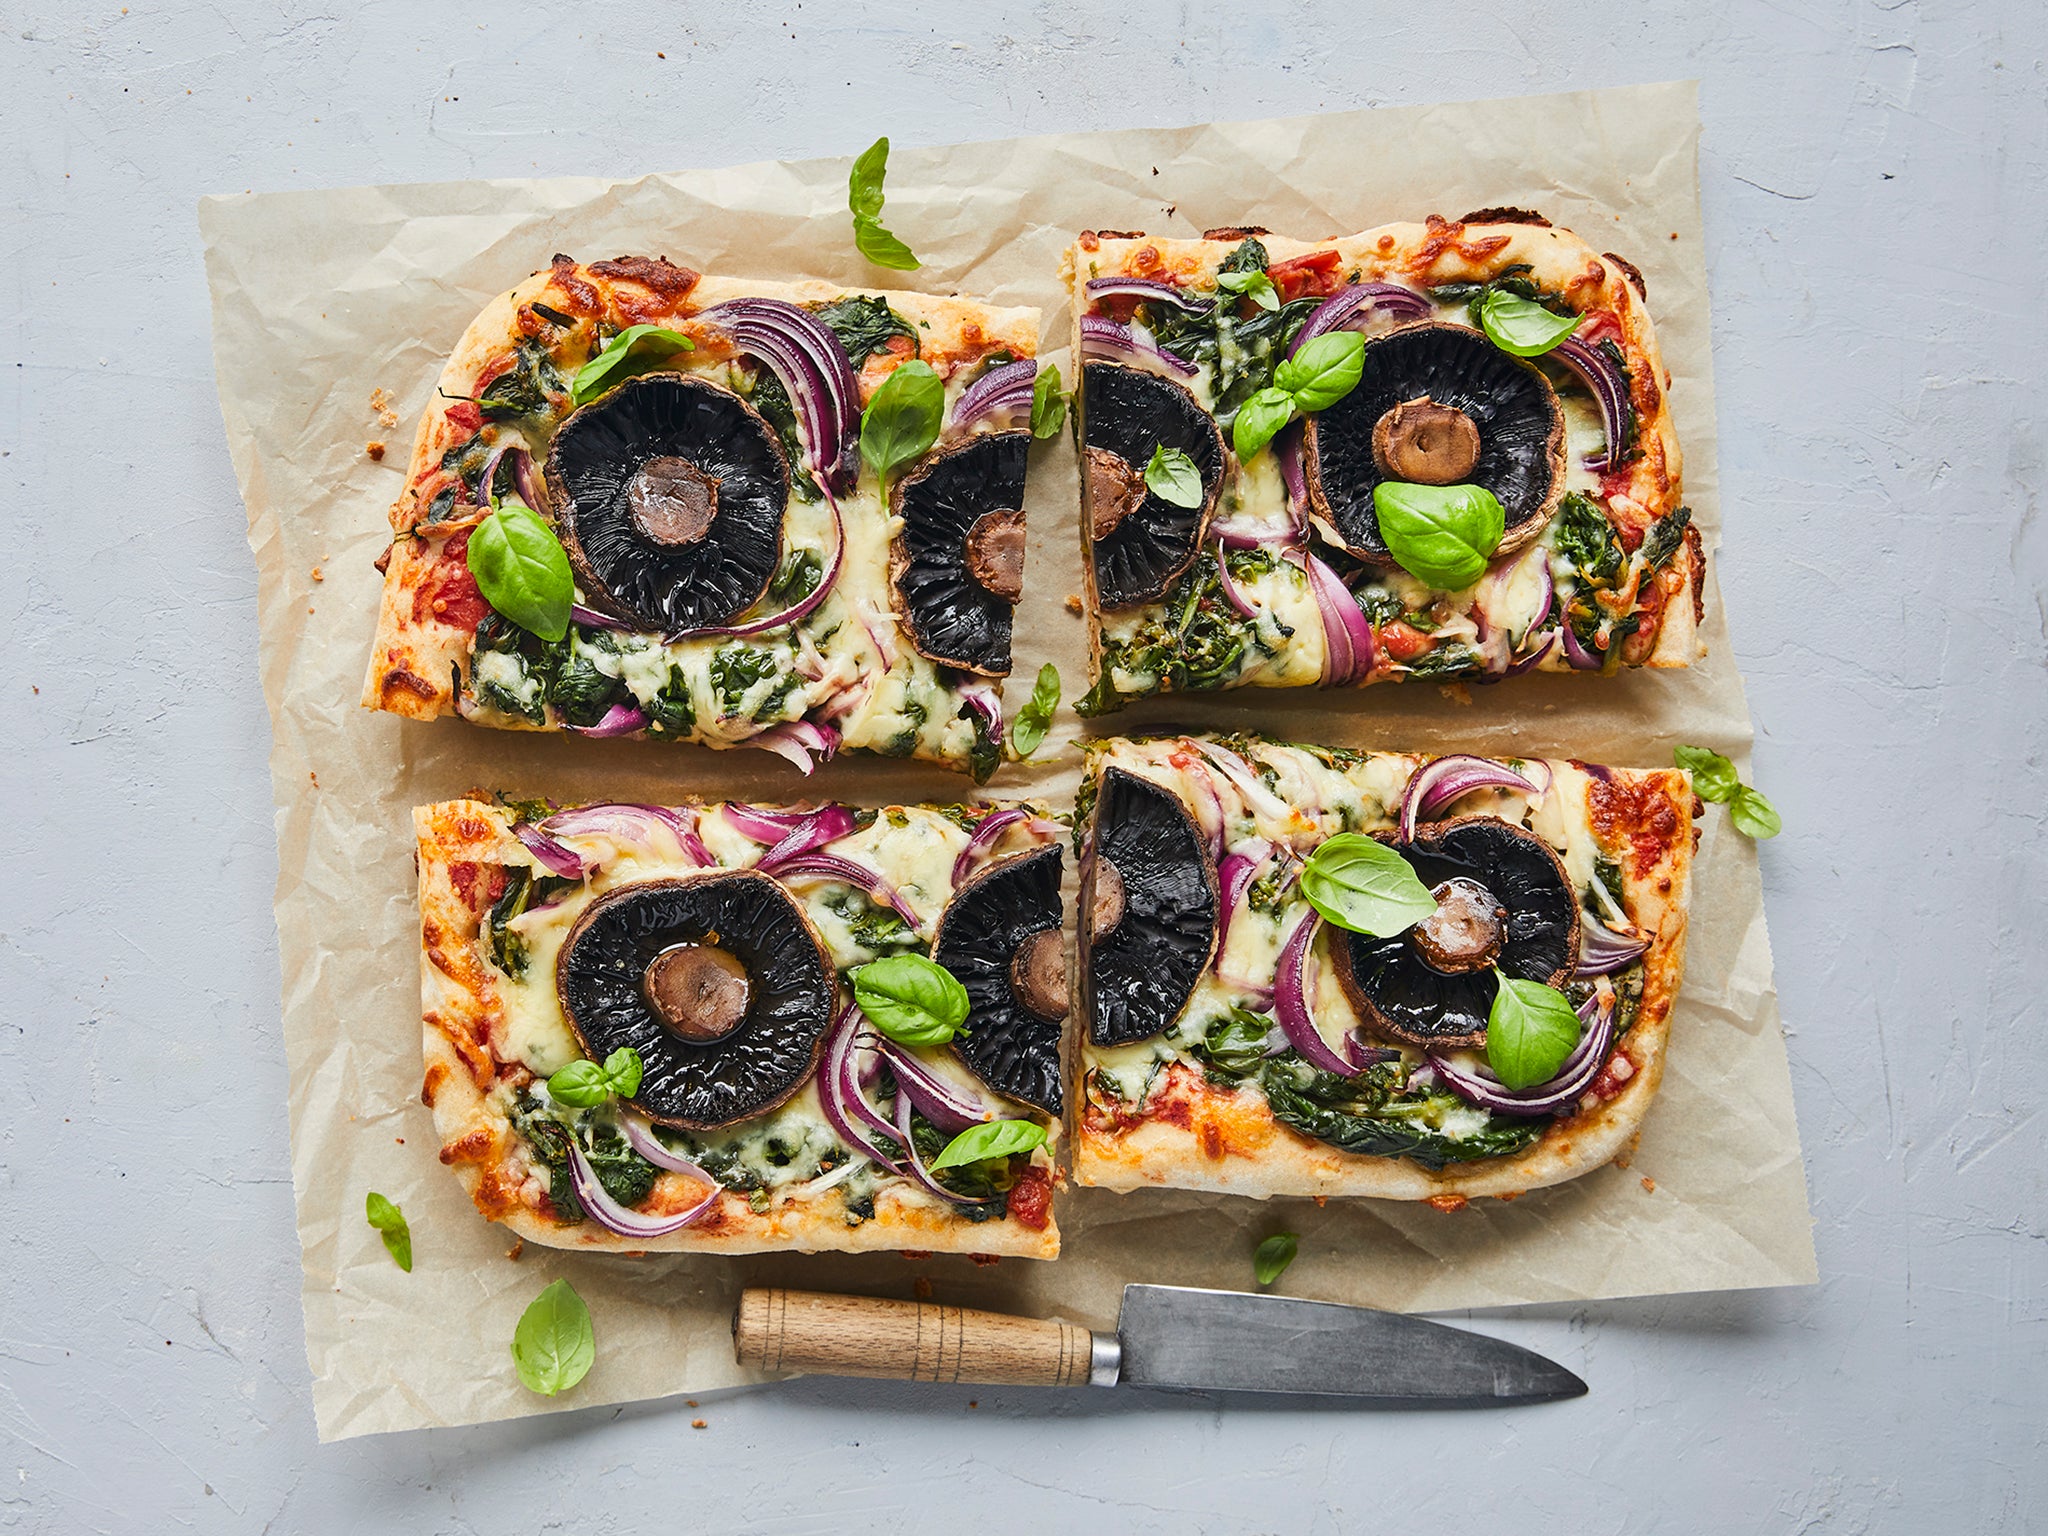 This tray-baked mushroom pizza is a total crowd pleaser